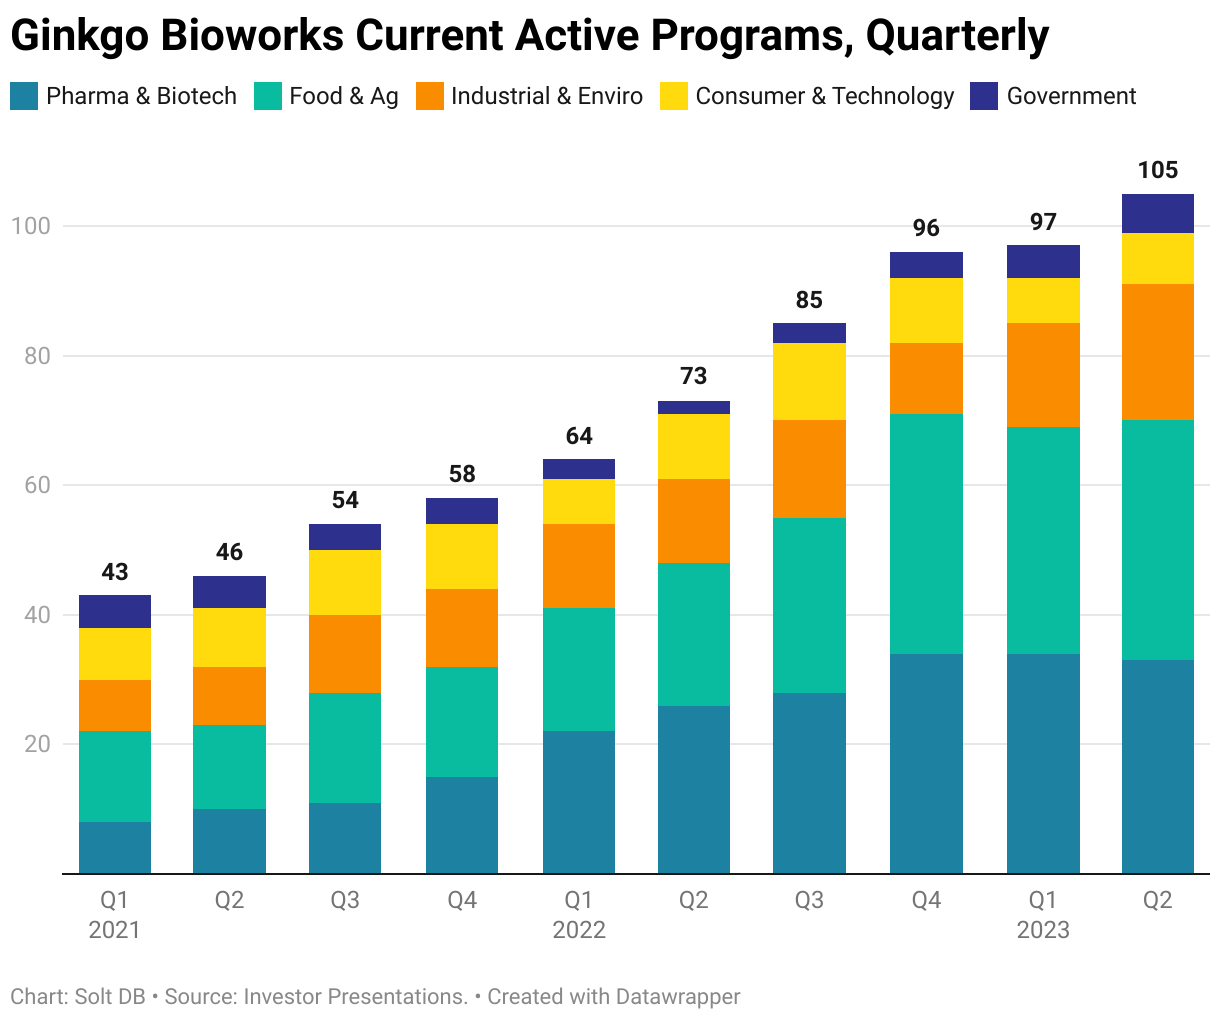 A stacked bar chart showing current active programs at Ginkgo Bioworks from the first quarter of 2021 to the second quarter of 2023.